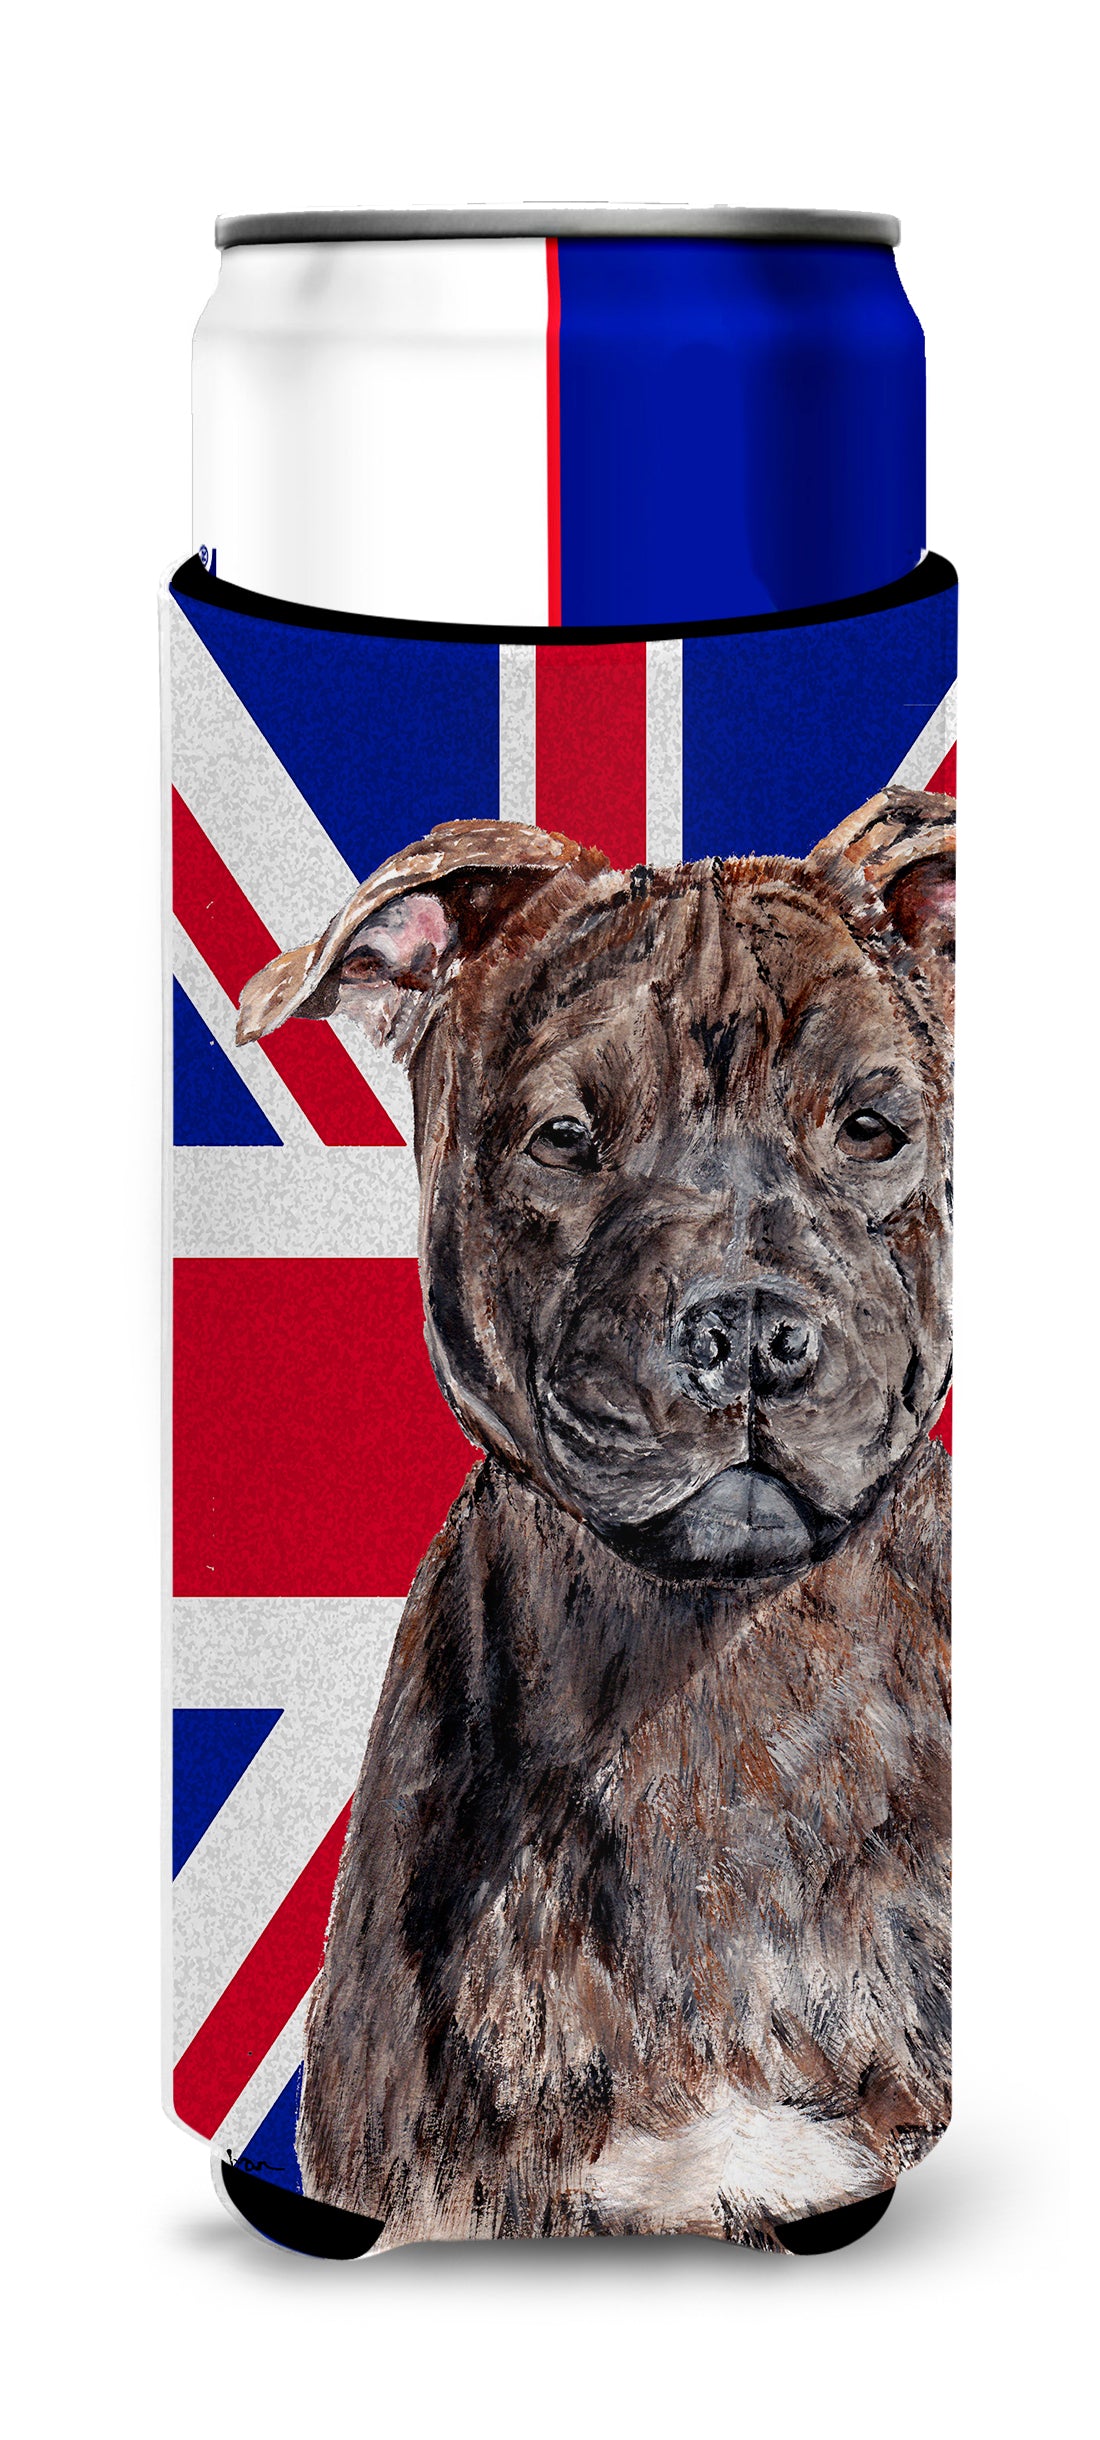 Staffordshire Bull Terrier Staffie with English Union Jack British Flag Ultra Beverage Insulators for slim cans SC9882MUK.